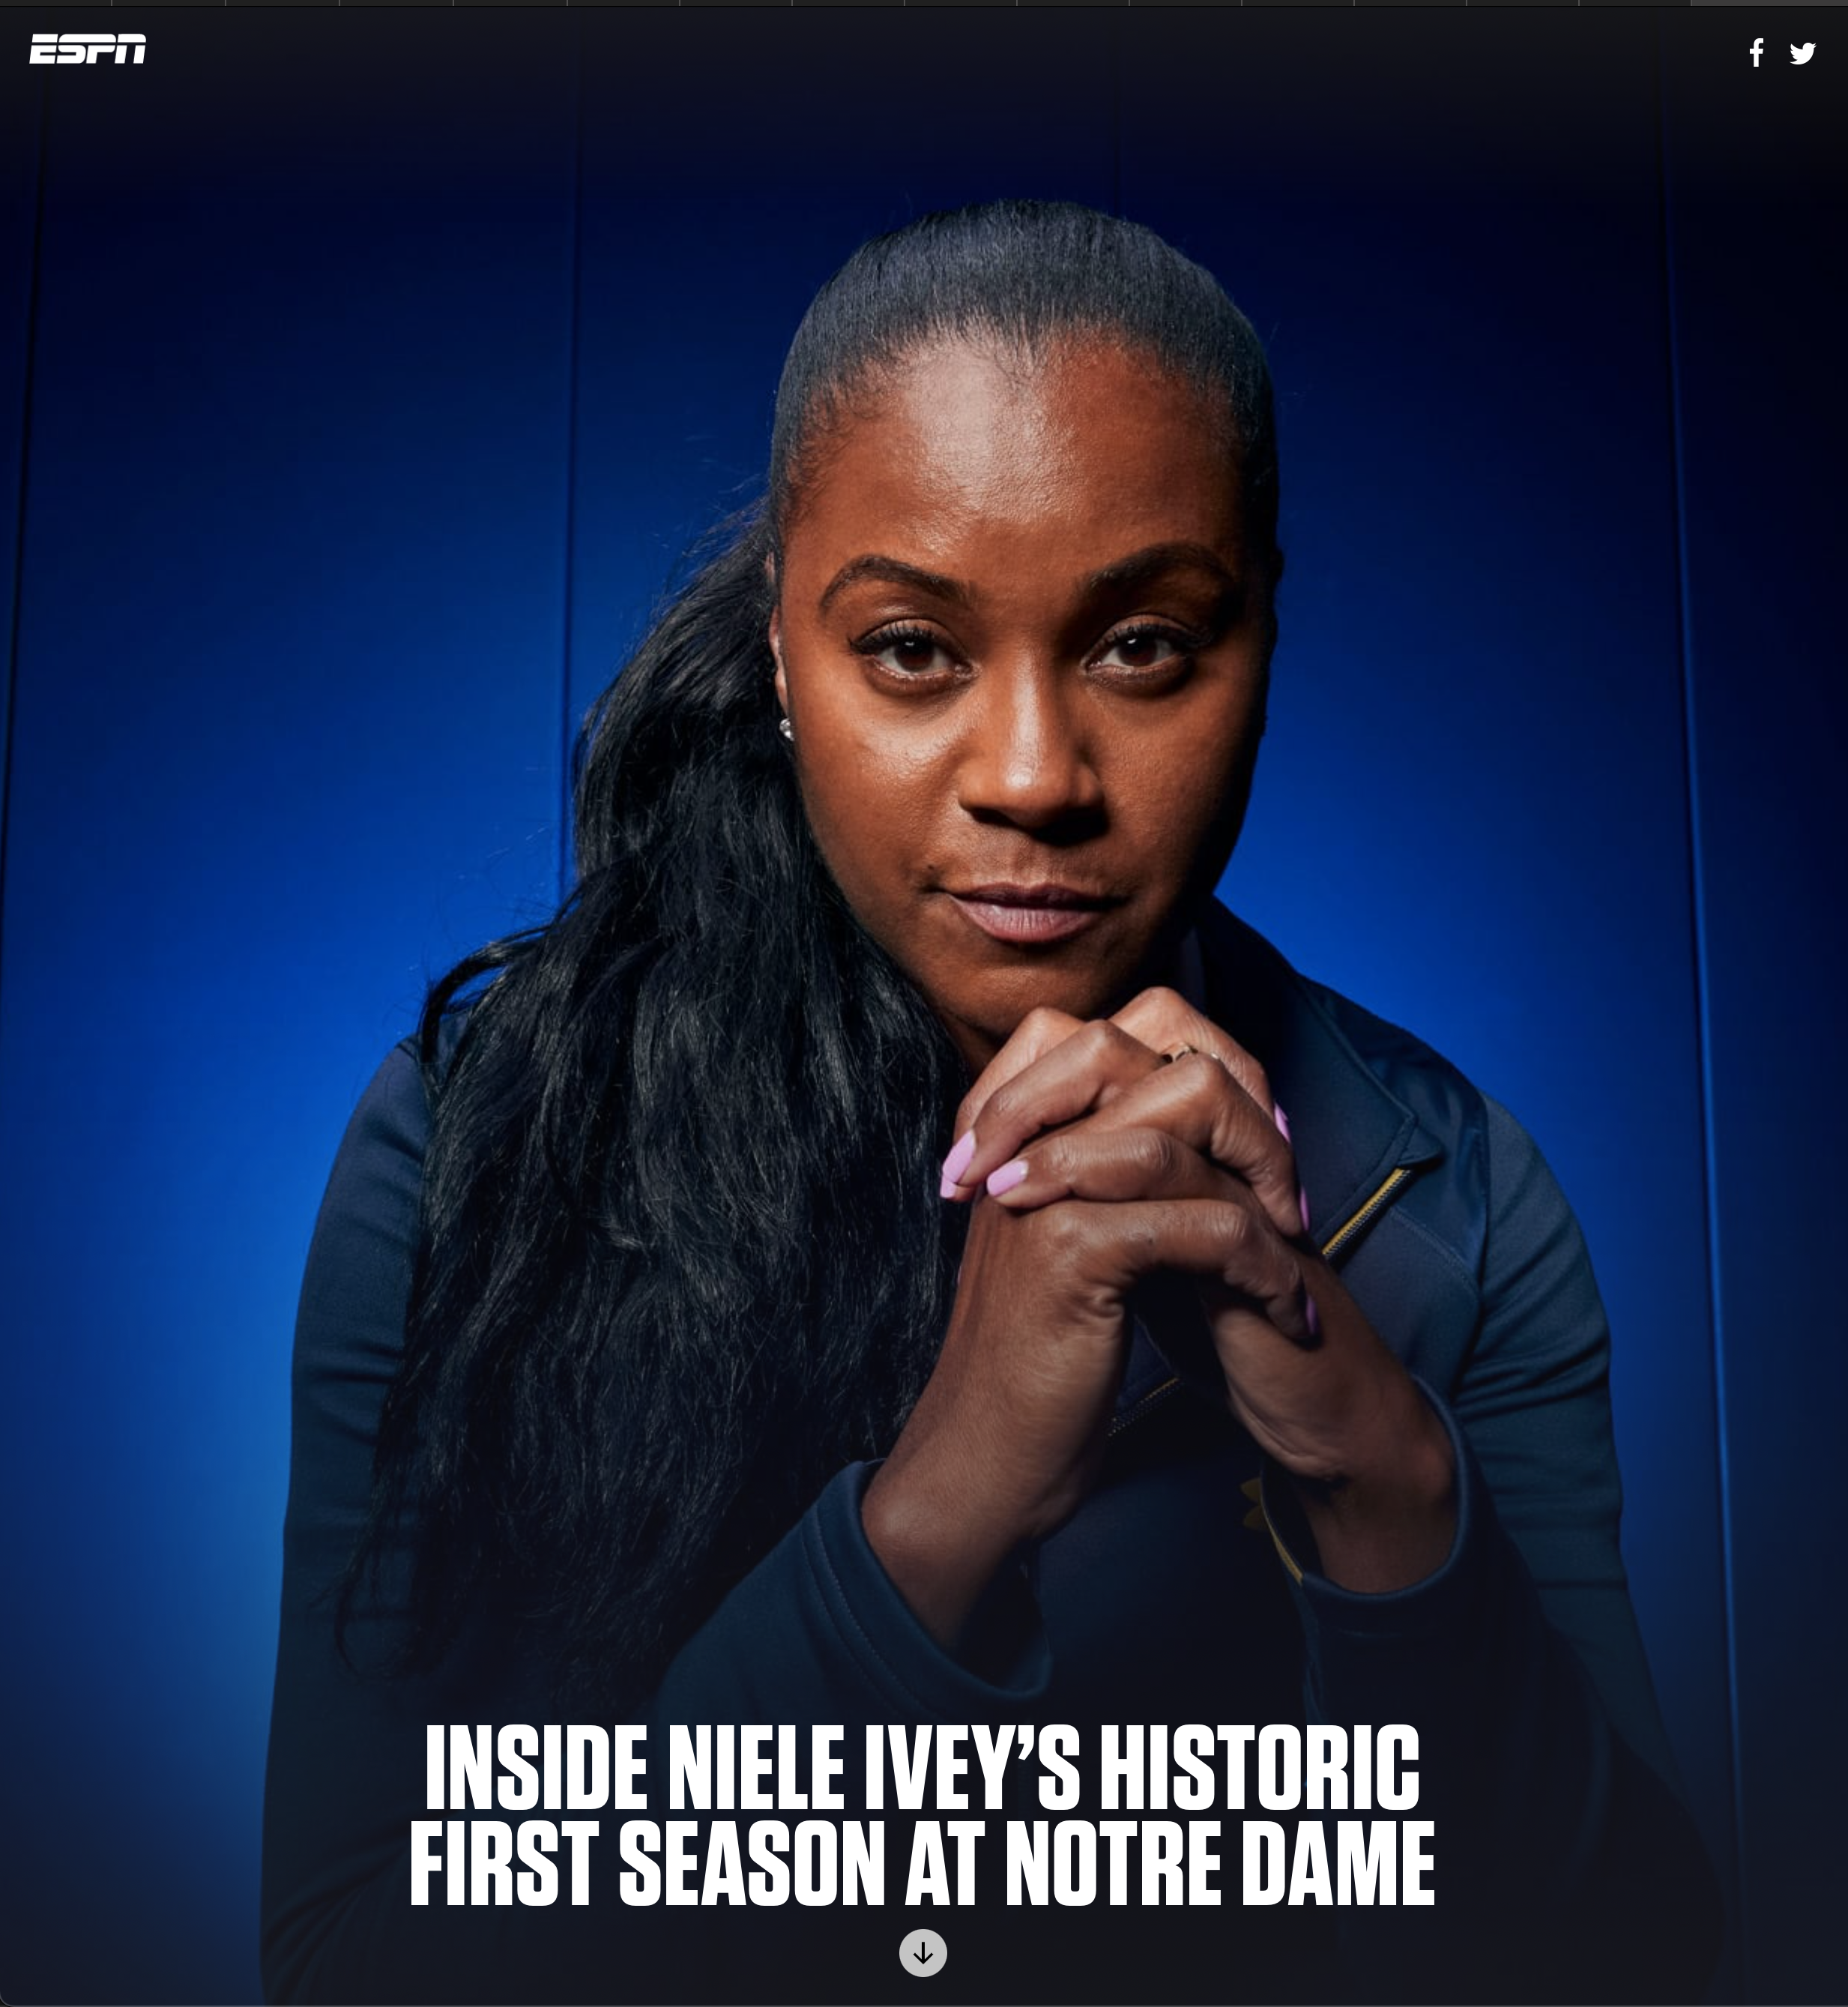   https://www.espn.com/espn/feature/story/_/id/32382121/notre-dame-women-basketball-niele-ivey-historic-first-season-moment-dreamt-of  